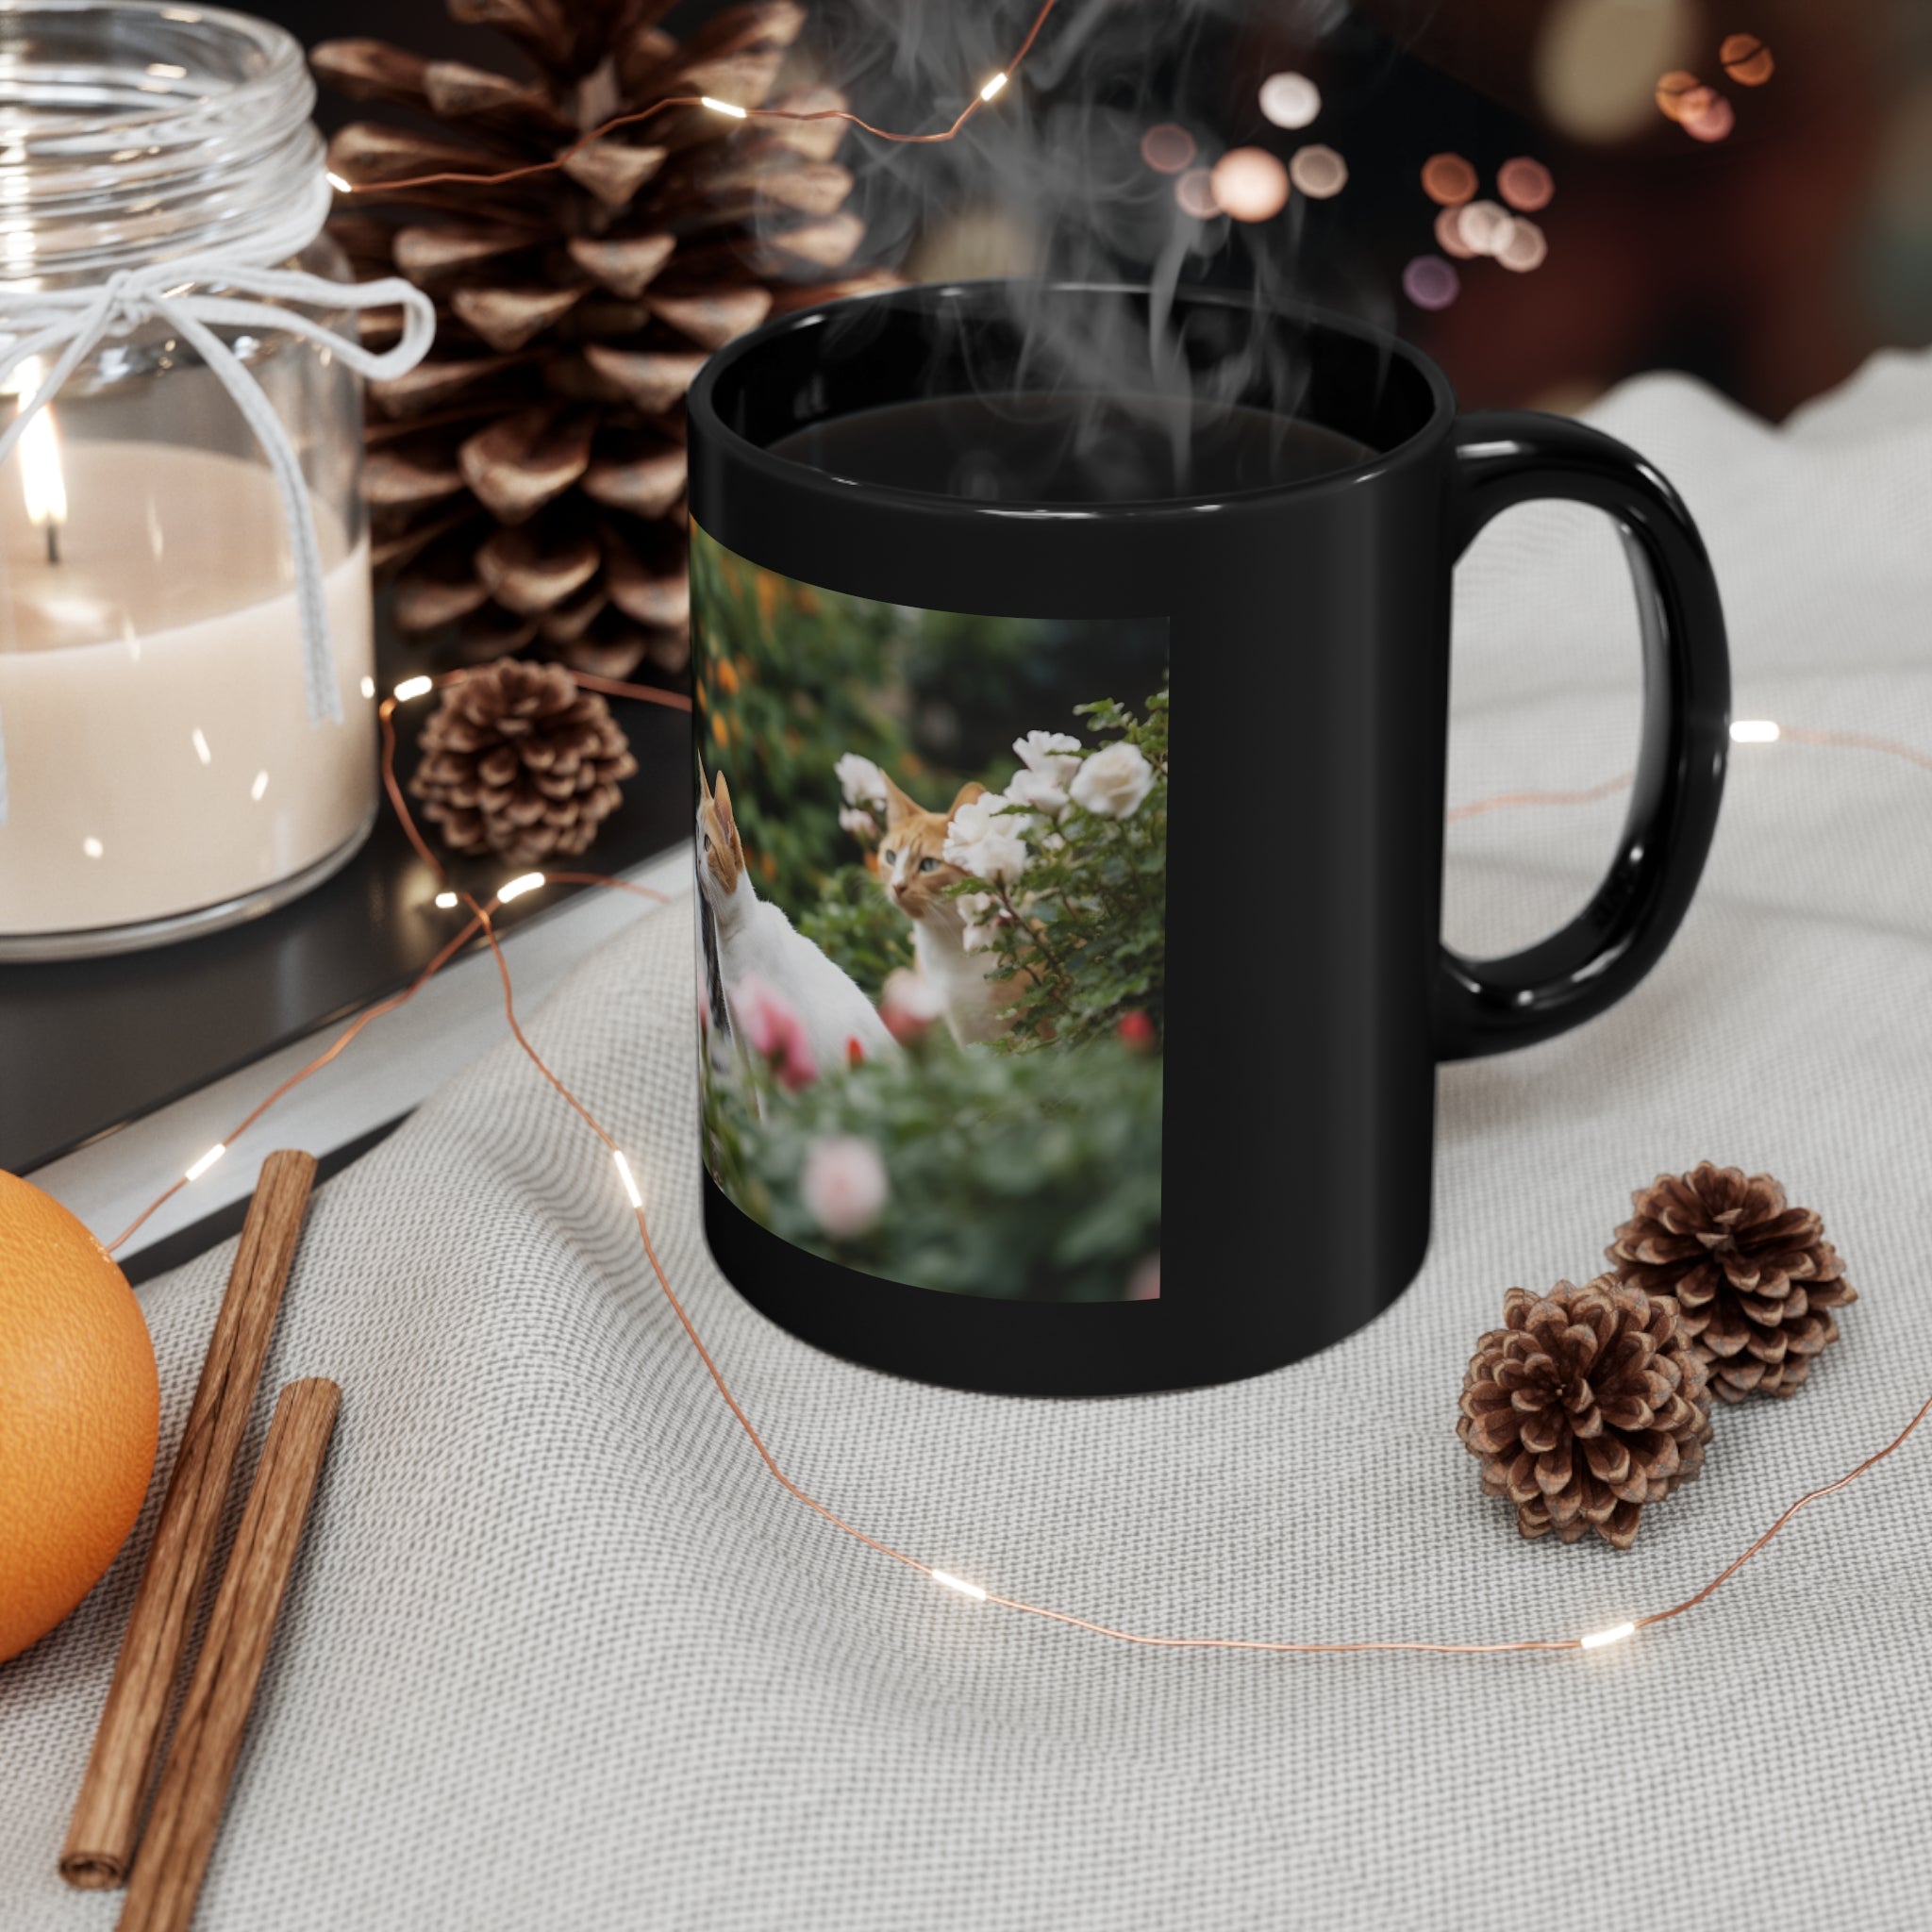 11oz Black Mug Photorealistic Beautiful Garden with Cats Pet Paradise - Black Coffee Cup - Garden Delight with Cats - Animal Lover's gift